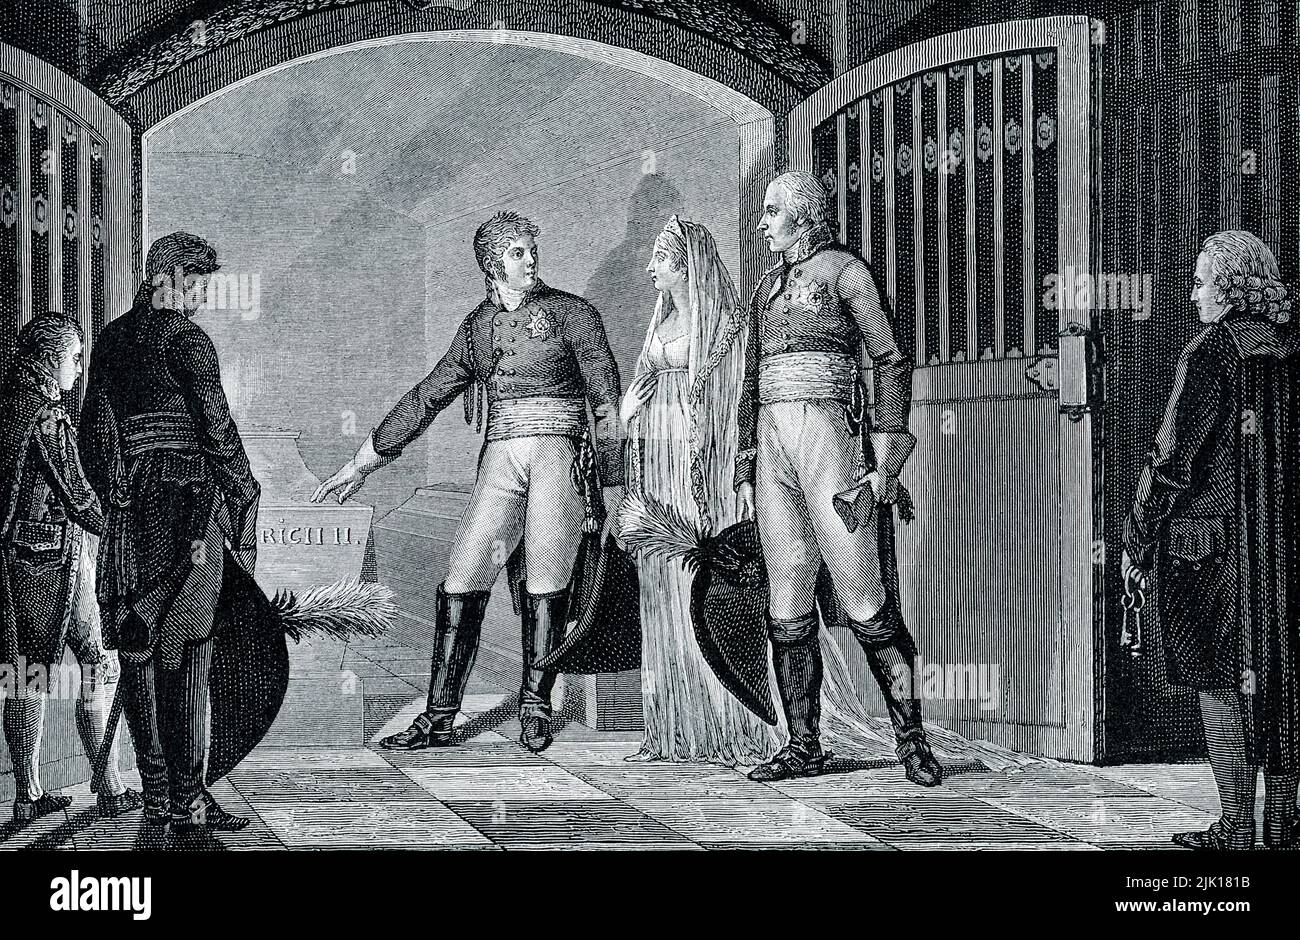 The 1906 caption reads: “ALEXANDER'S OATH AT THE TOMB OF FREDERICK THE GREAT.—Alexander I., who became Czar through the tragic death of Paul, joined Austria and Prussia in opposing Napoleon. With Louise and Frederick William, the sovereigns of Prussia, he went down into the tomb of Prussia's hero, Frederick the Great, and there with solemn enthusiasm the monarchs swore to stand together in resistance to French aggression.” Alexander I was Emperor of Russia from 1801 to his death in 1825. Stock Photo